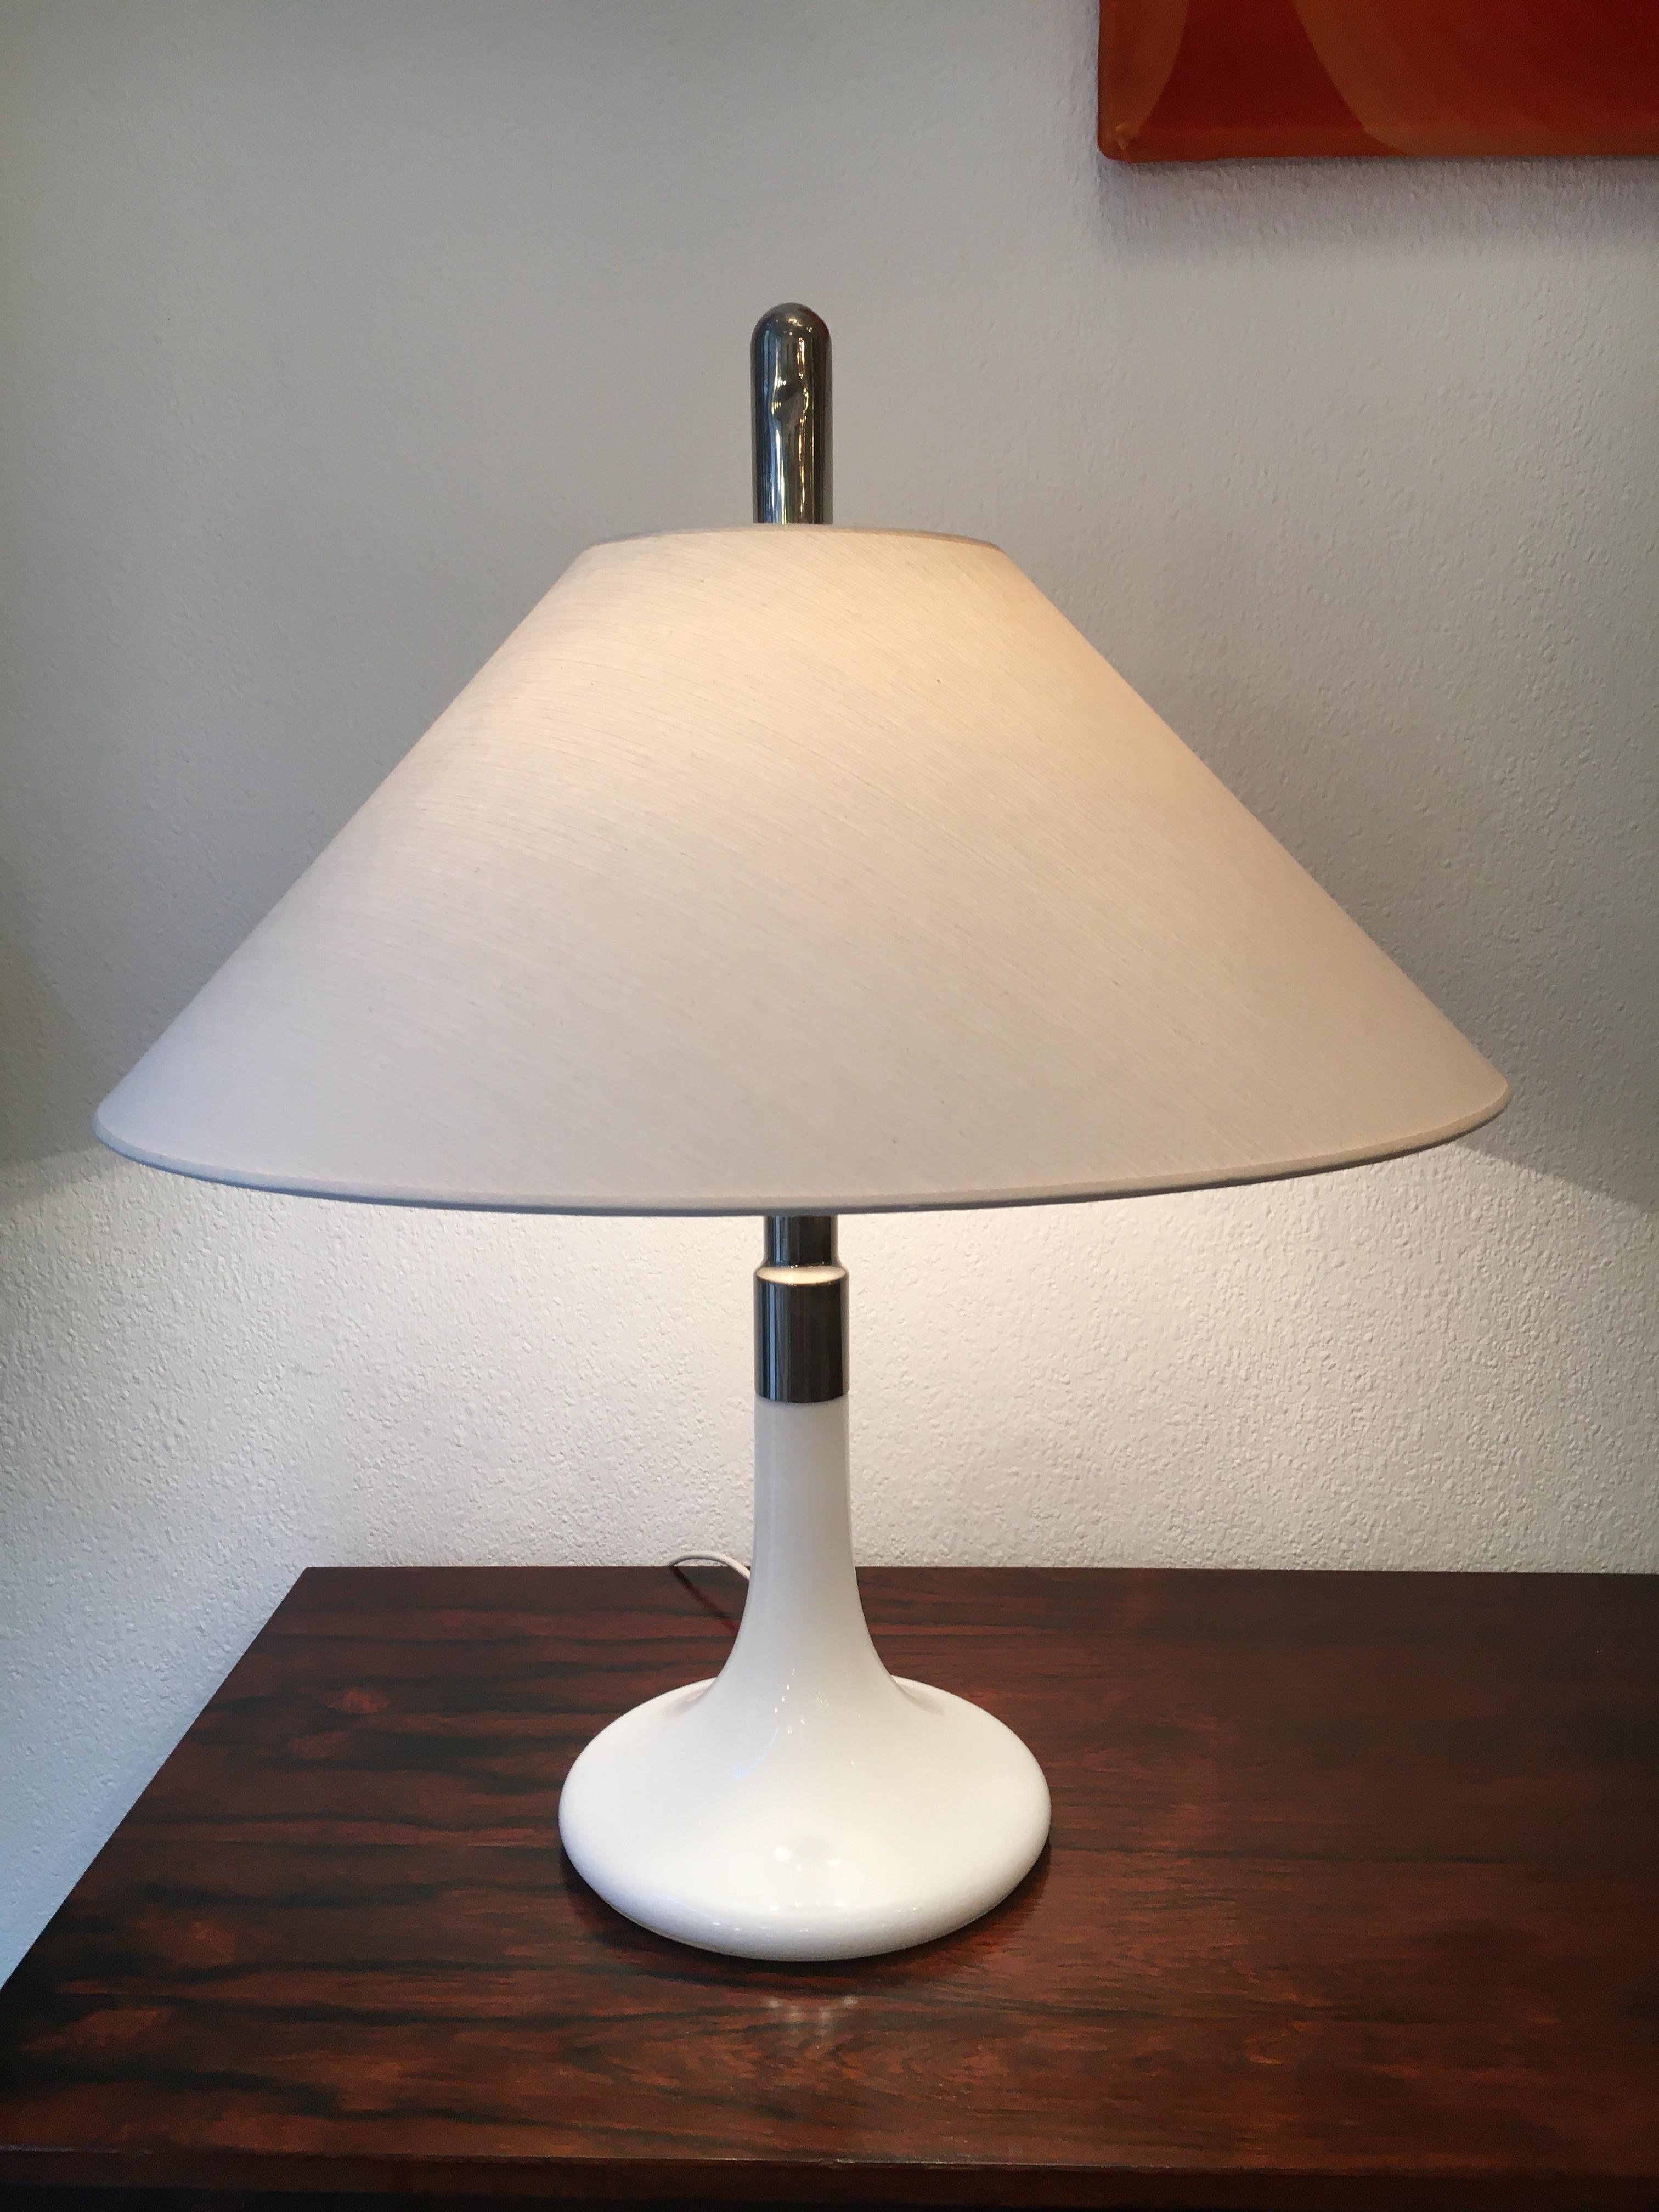 ML3 white glass base with chrome top and new paper shade.
Designed by Ingo Maurer for Design M Germany ca. 1960s
Very good condition 
Measures: H 70 x D 60cm.